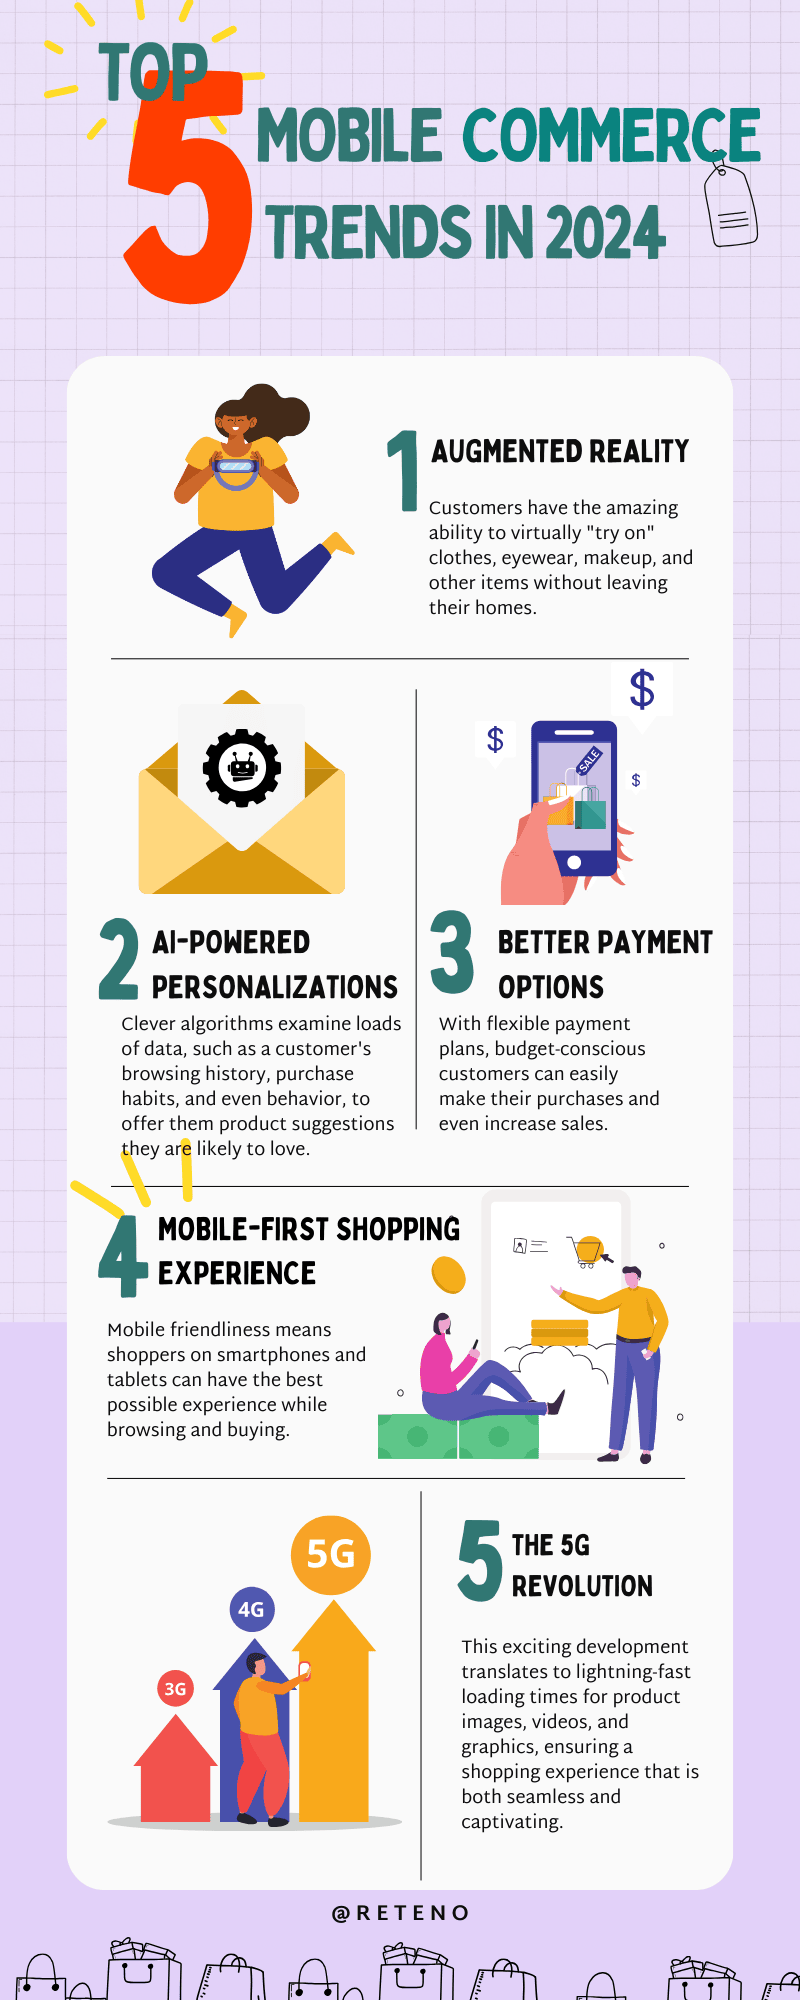 Top 5 Mobile Commerce Trends